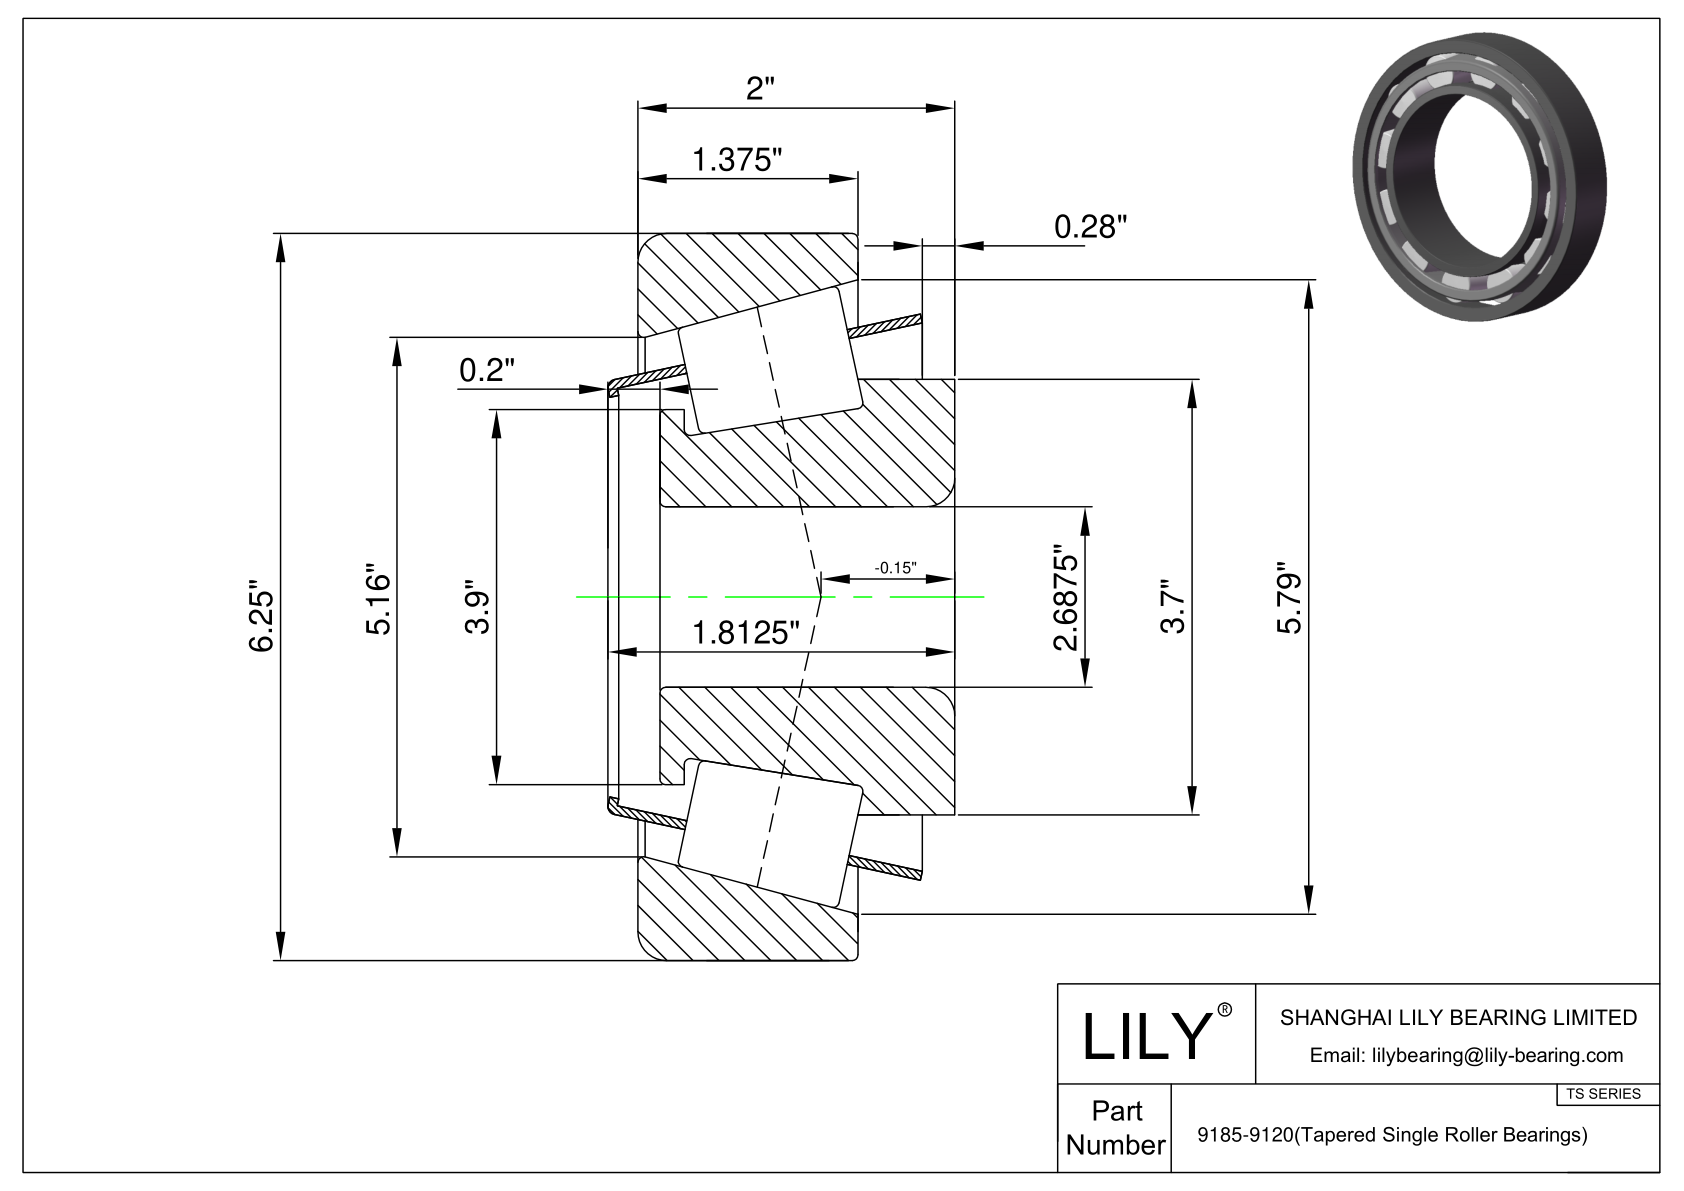 9185-9120 TS (Tapered Single Roller Bearings) (Imperial) cad drawing